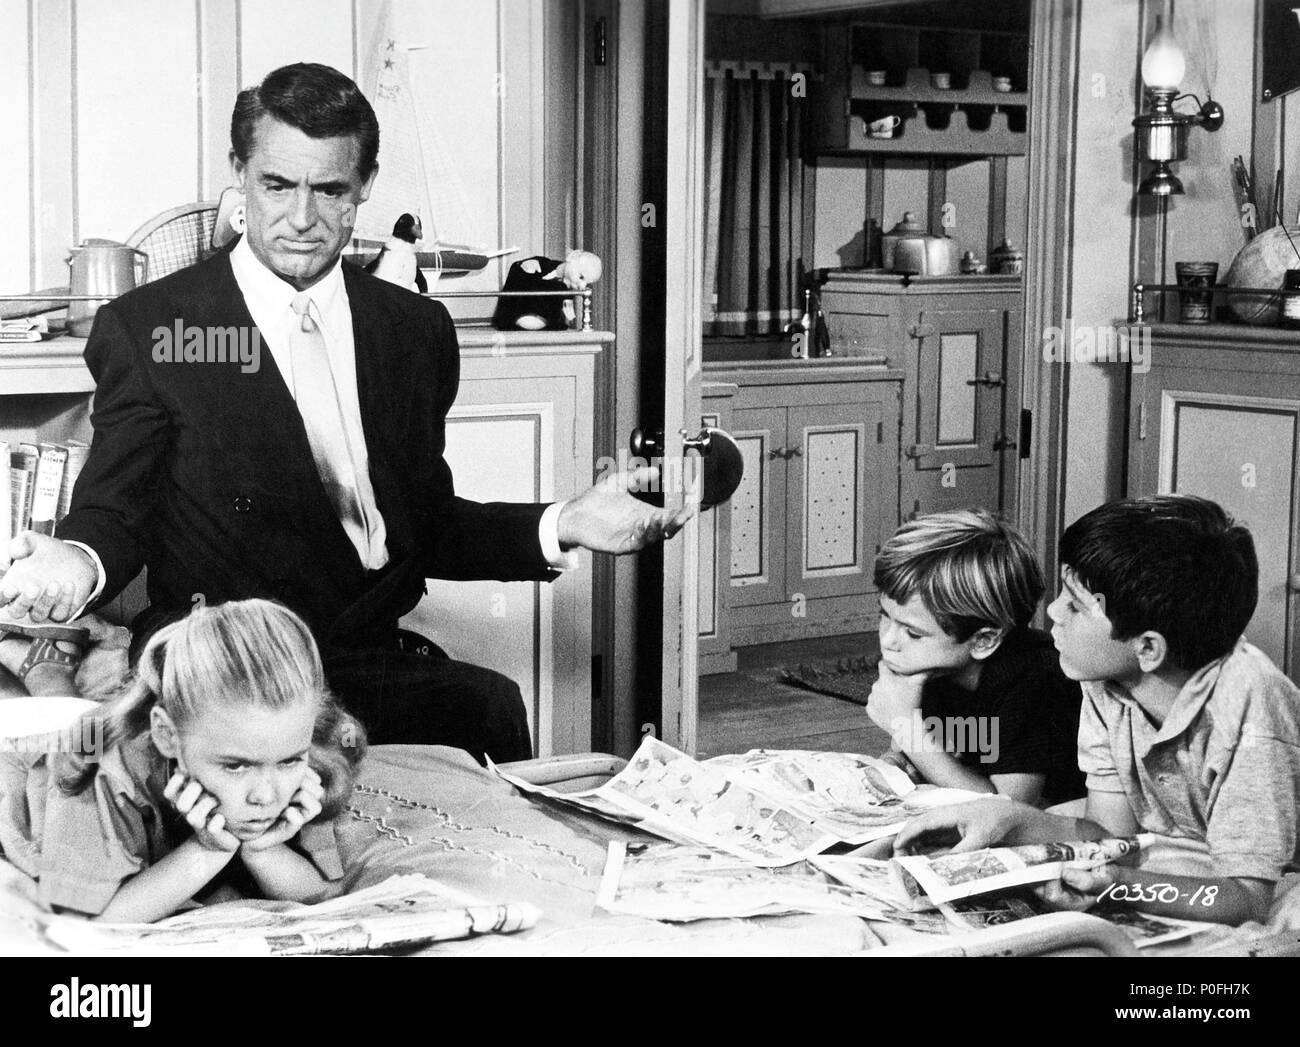 Original Film Title: HOUSEBOAT.  English Title: HOUSEBOAT.  Film Director: MELVILLE SHAVELSON.  Year: 1958.  Stars: CARY GRANT; CHARLES HERBERT; PAUL PETERSEN; MIMI GIBSON. Credit: PARAMOUNT PICTURES / Album Stock Photo